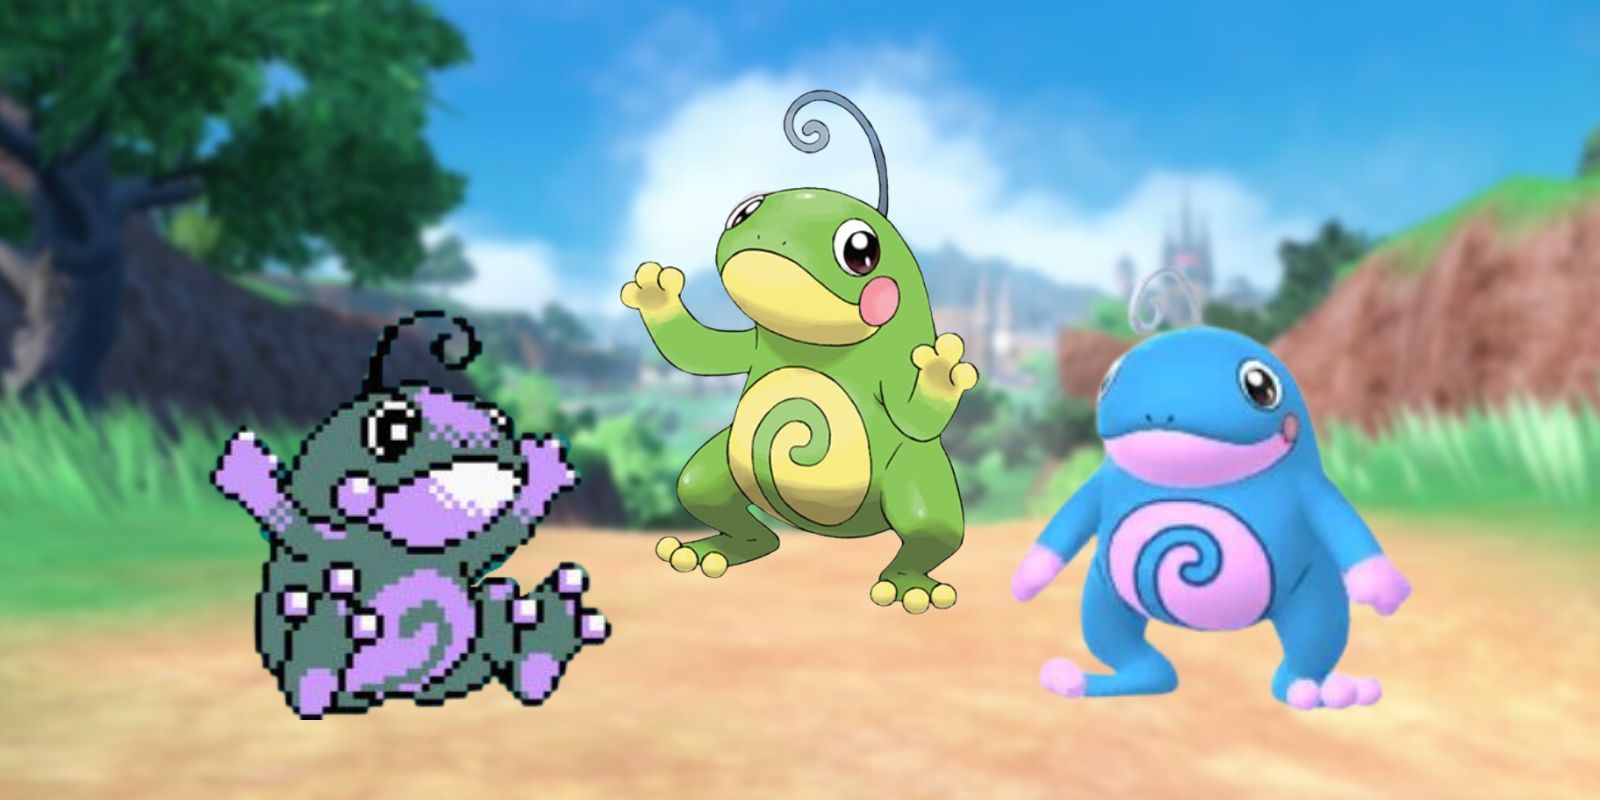 Politoed with both the old and new shiny versions